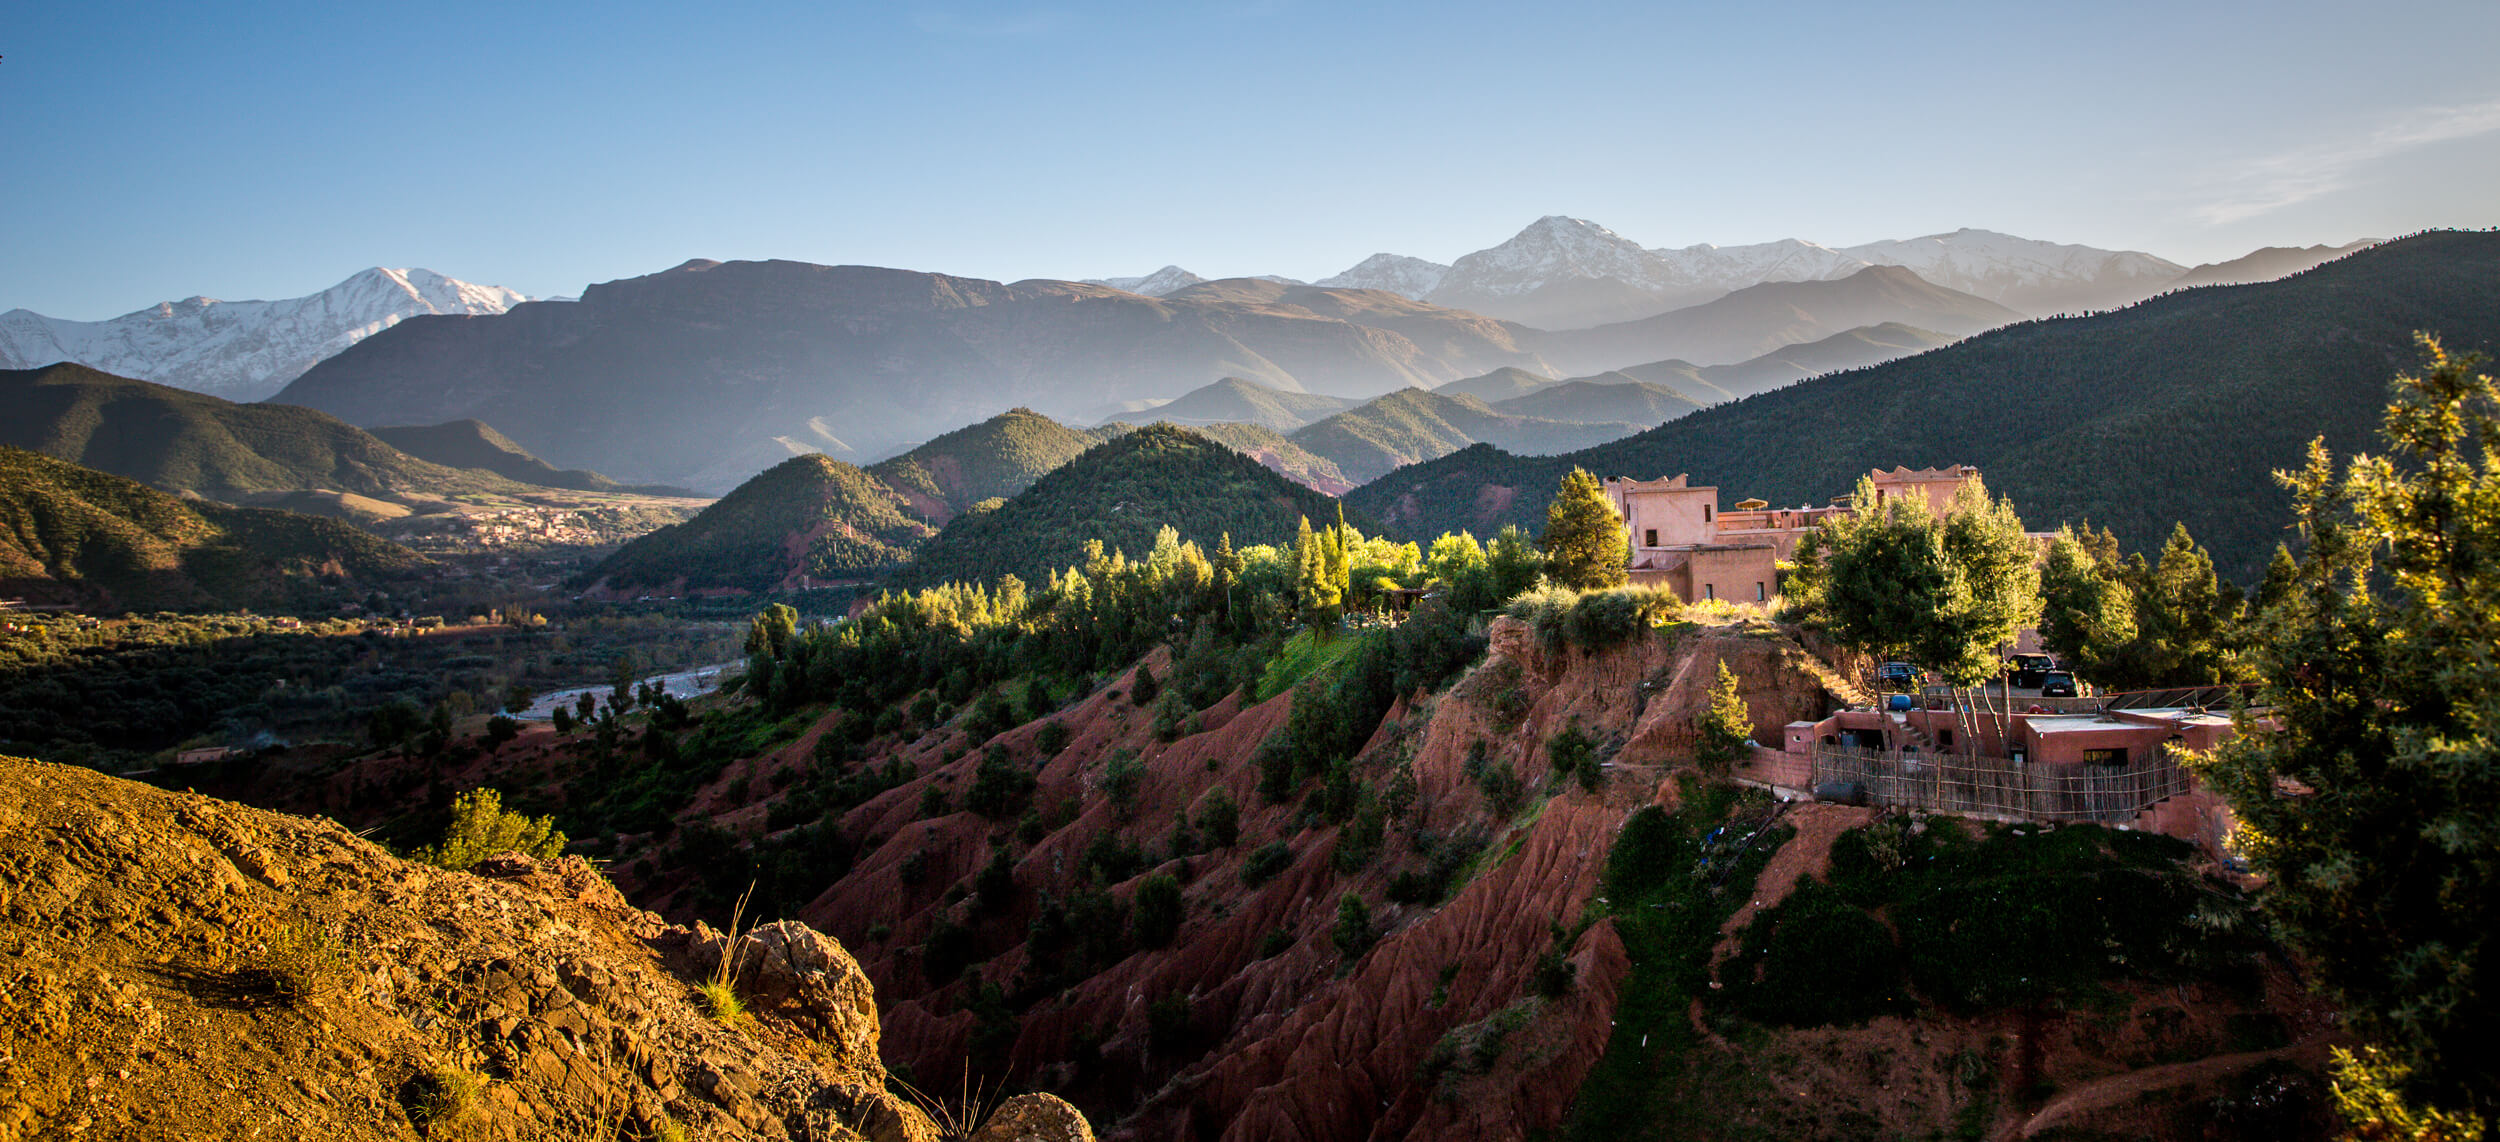 View of Kasbah Bab Ourika at sunset